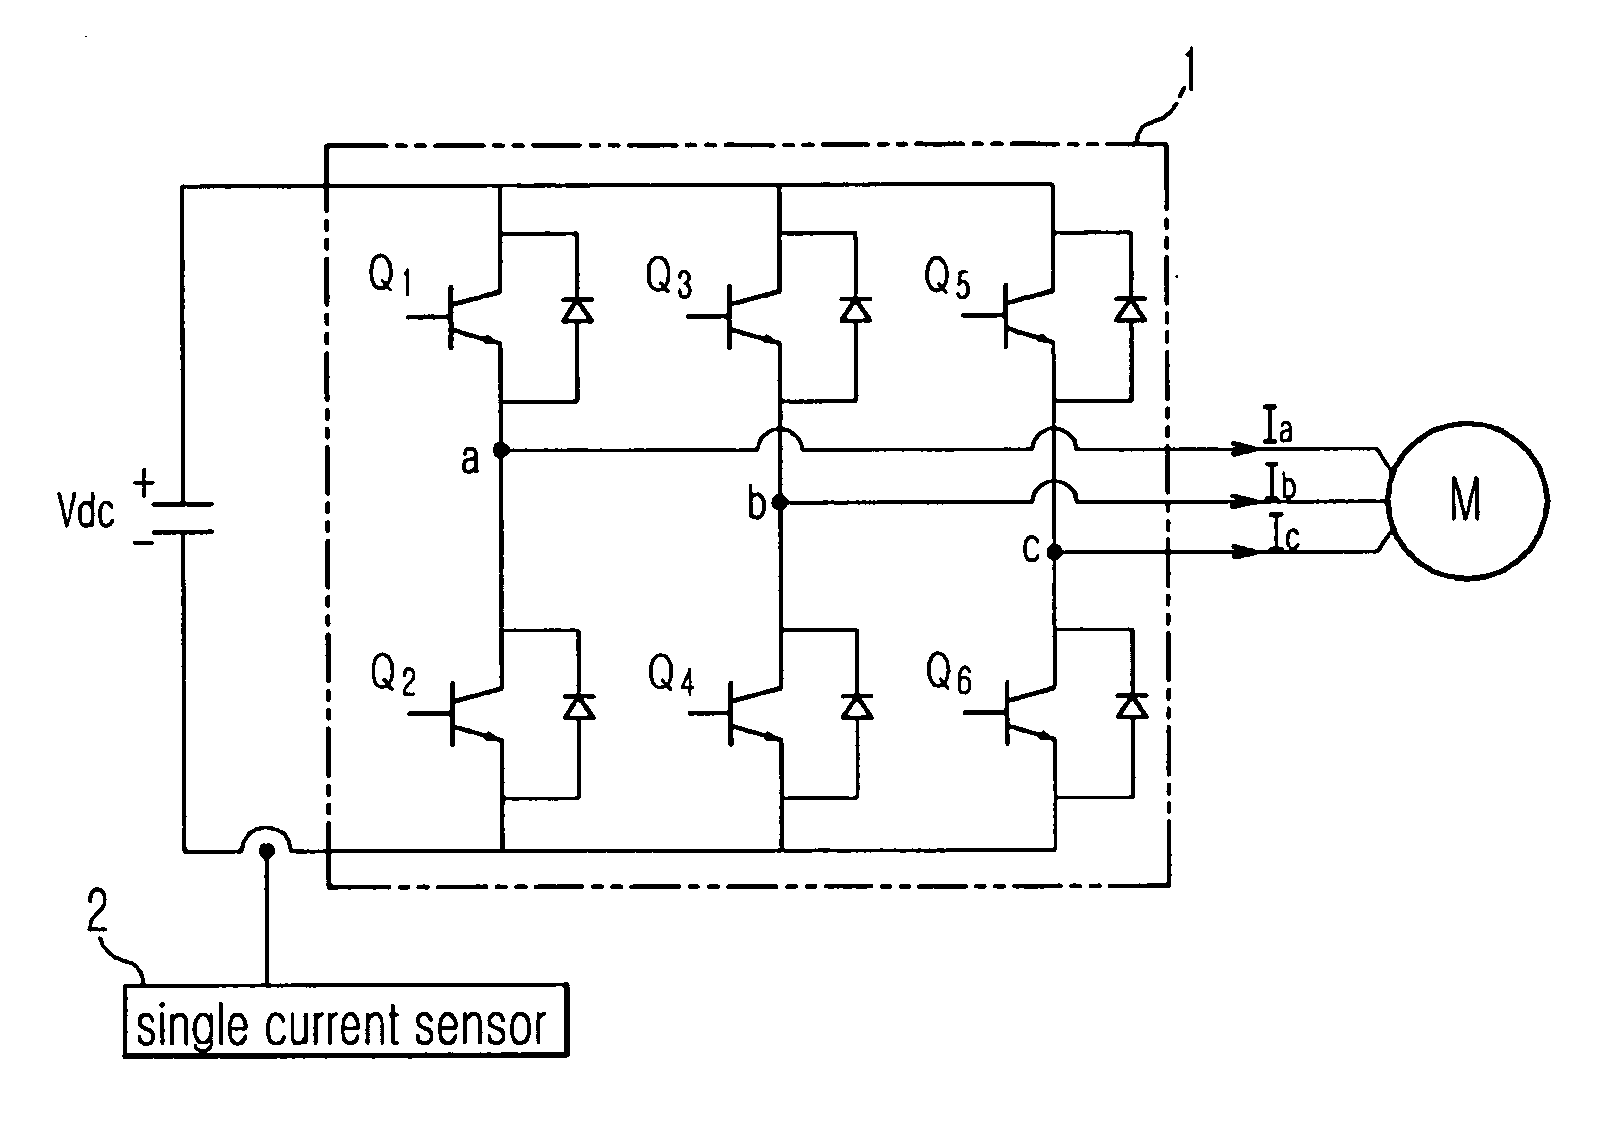 Method to predict phase current